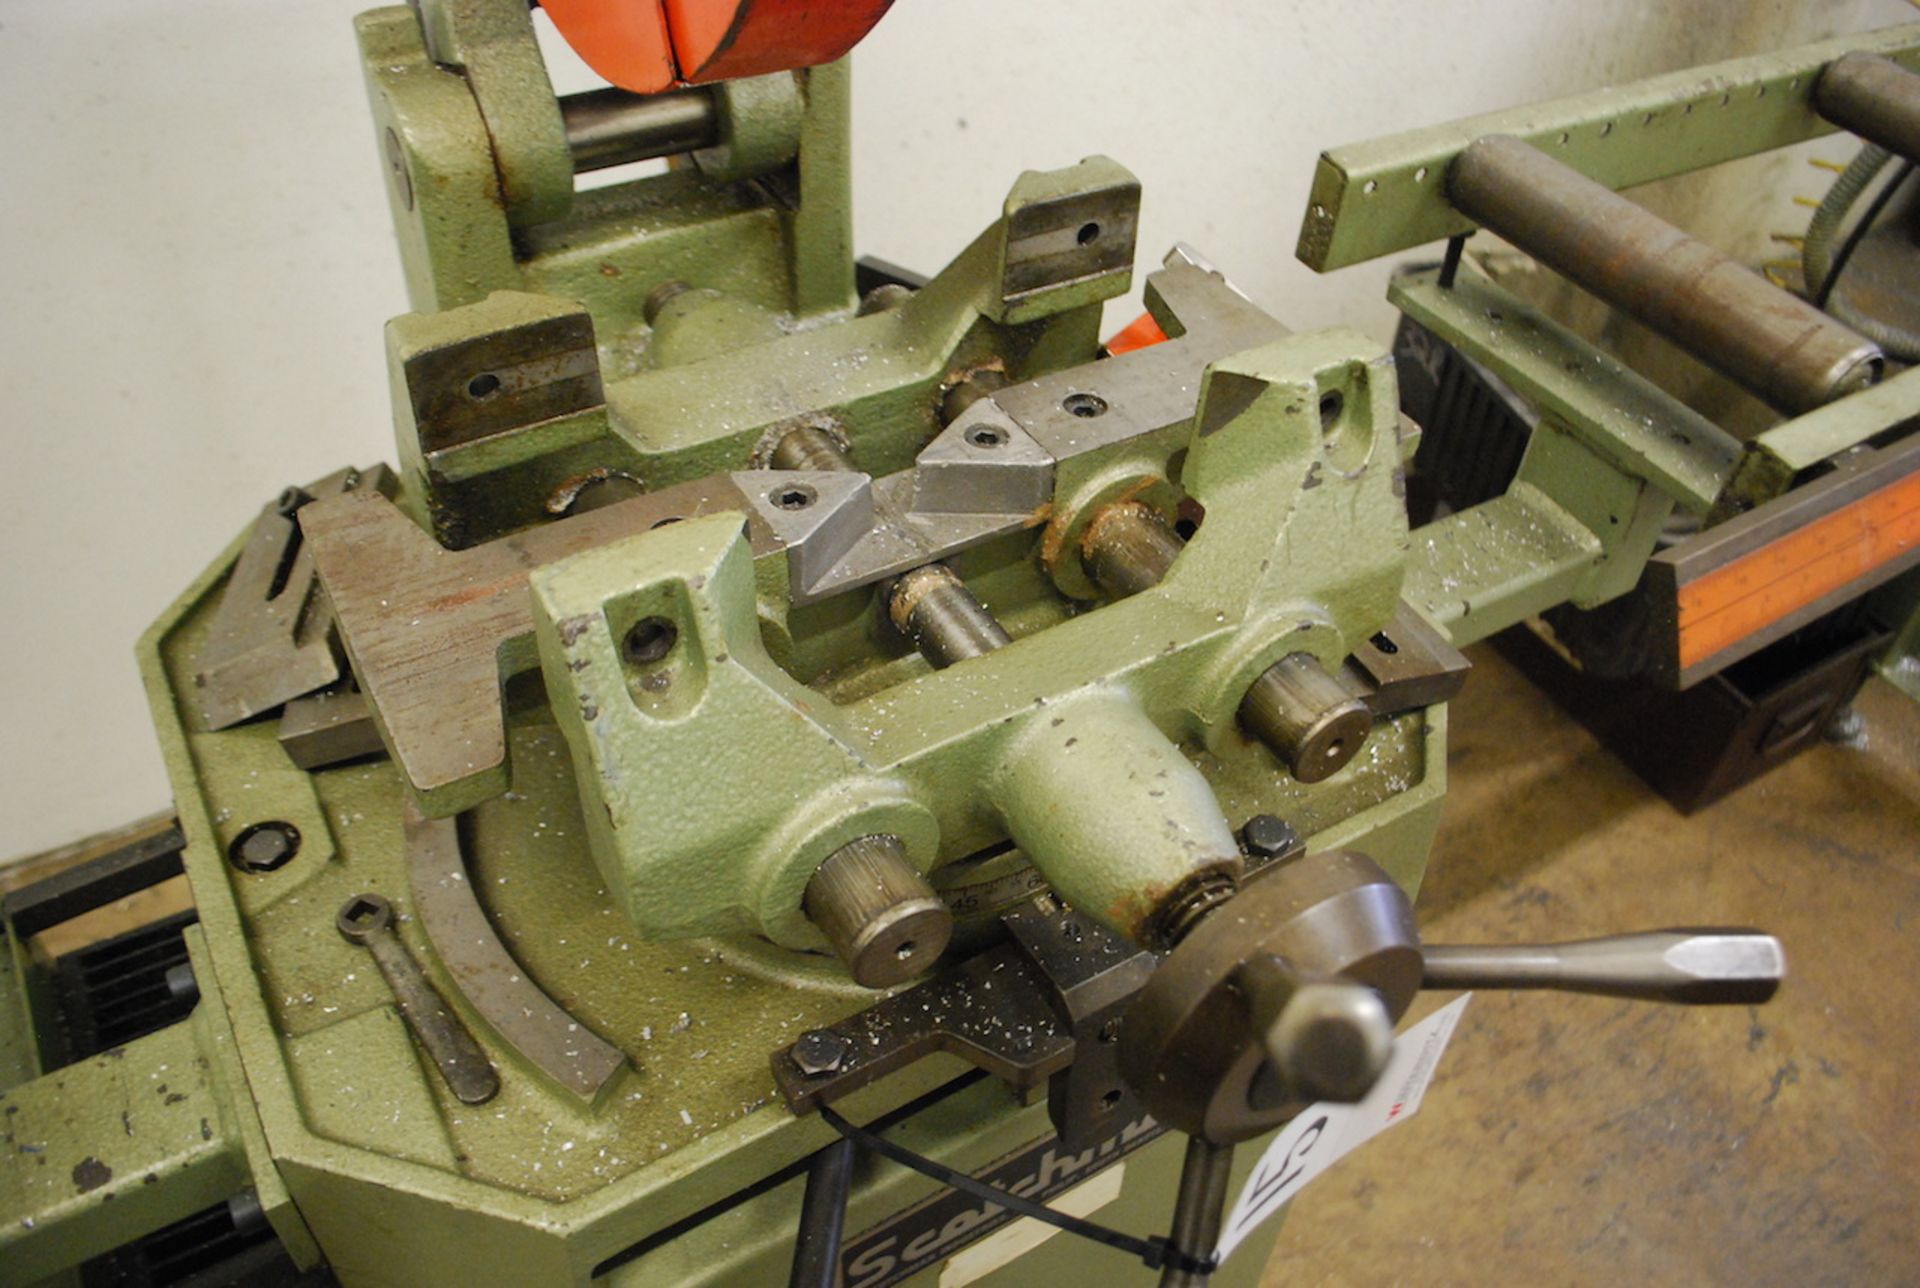 SCOTCHMAN 14” MODEL 350HT COLD SAW: S/N 58120901 (2001); MANUAL VISE; 5HP; 10' INFEED ROLLER - Image 3 of 3